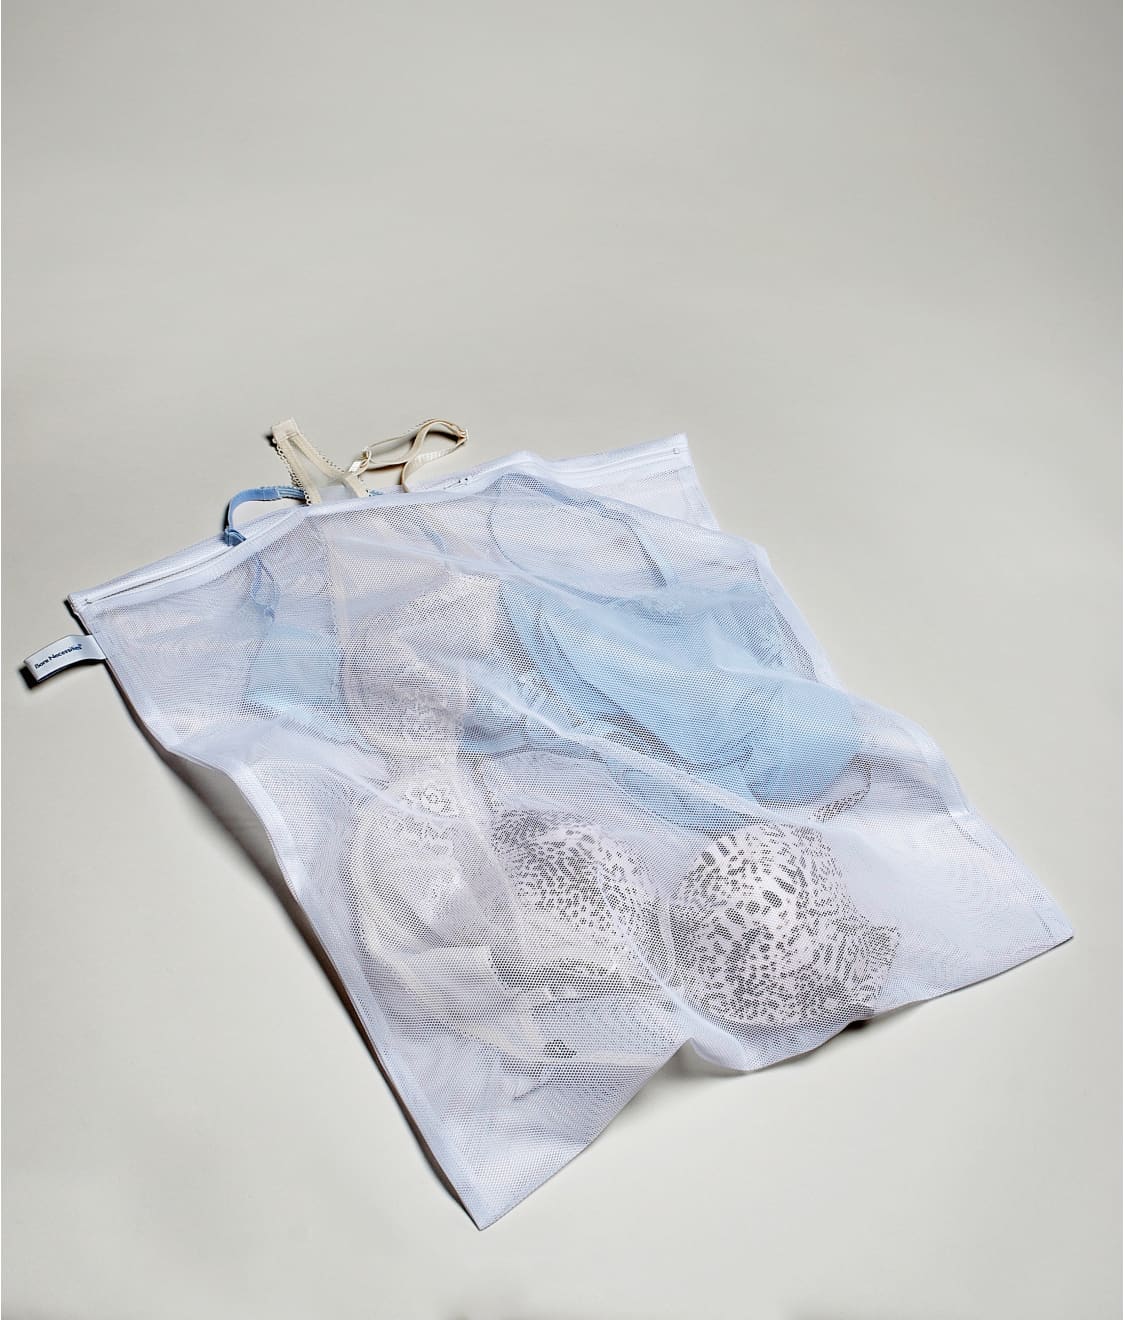 Bare Necessities: Large Lingerie Wash Bag BN2000